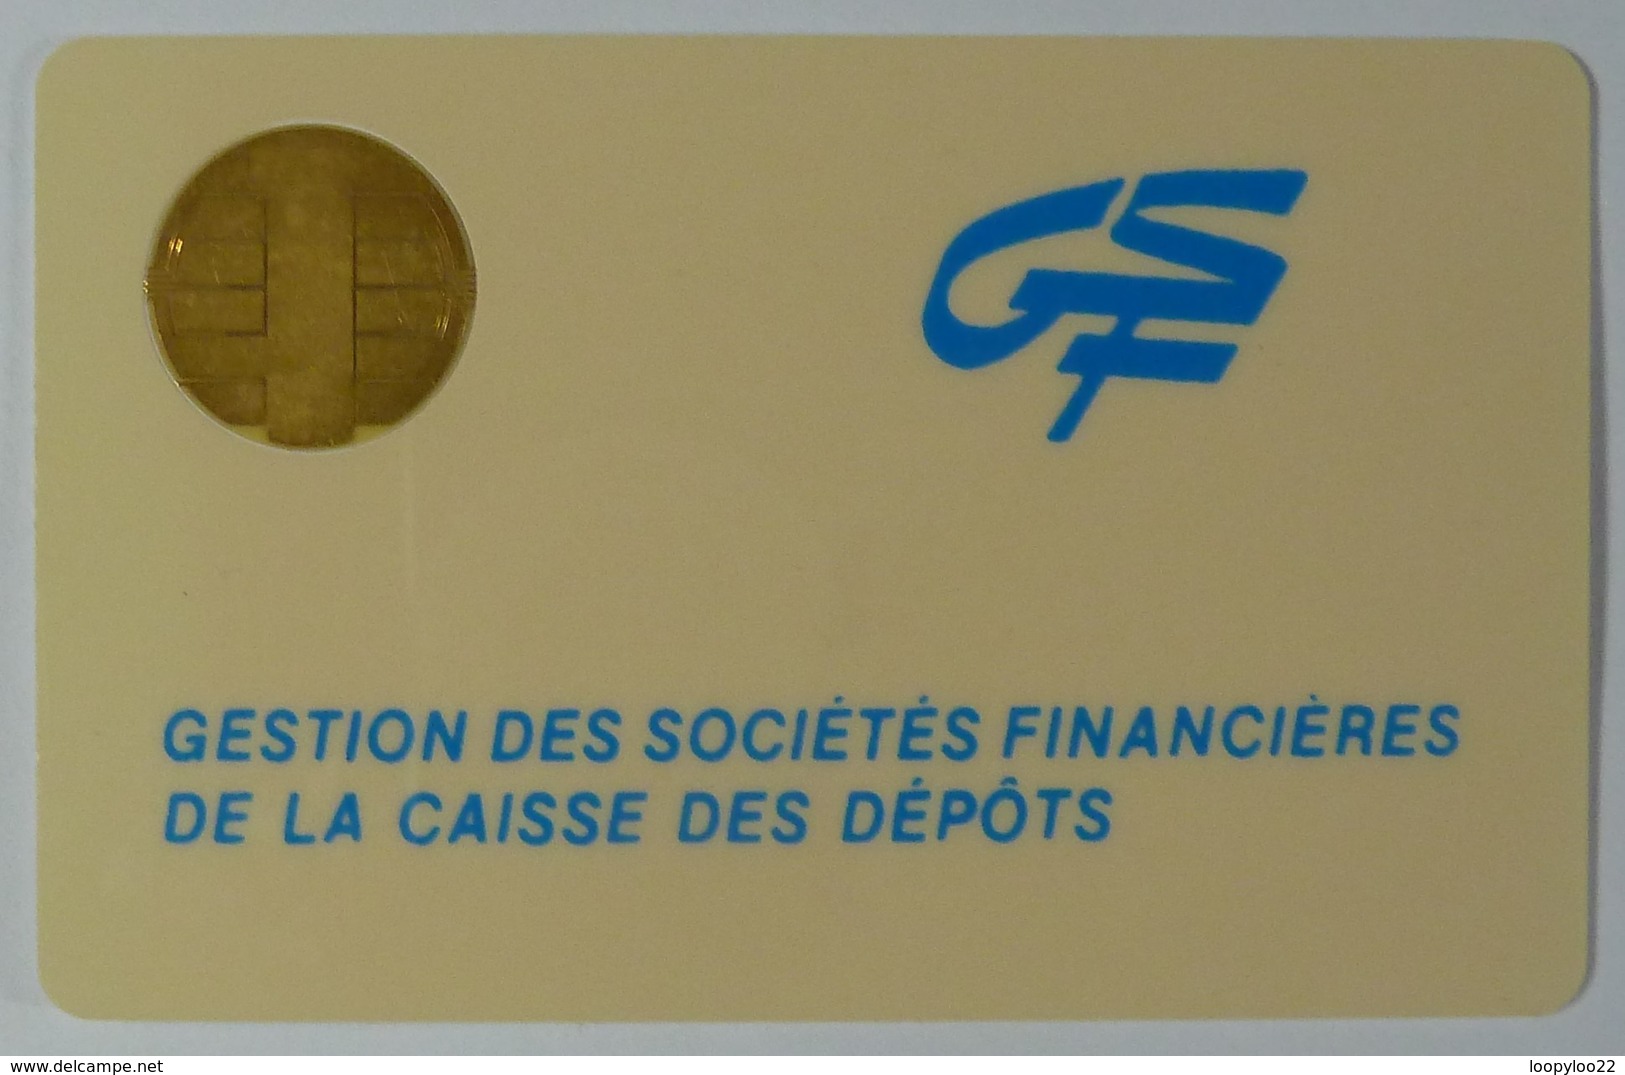 FRANCE - Bull Chip - Smartcard - Gestion Des Societes Financiiers - Department Of Finance - Used - Phonecards: Internal Use